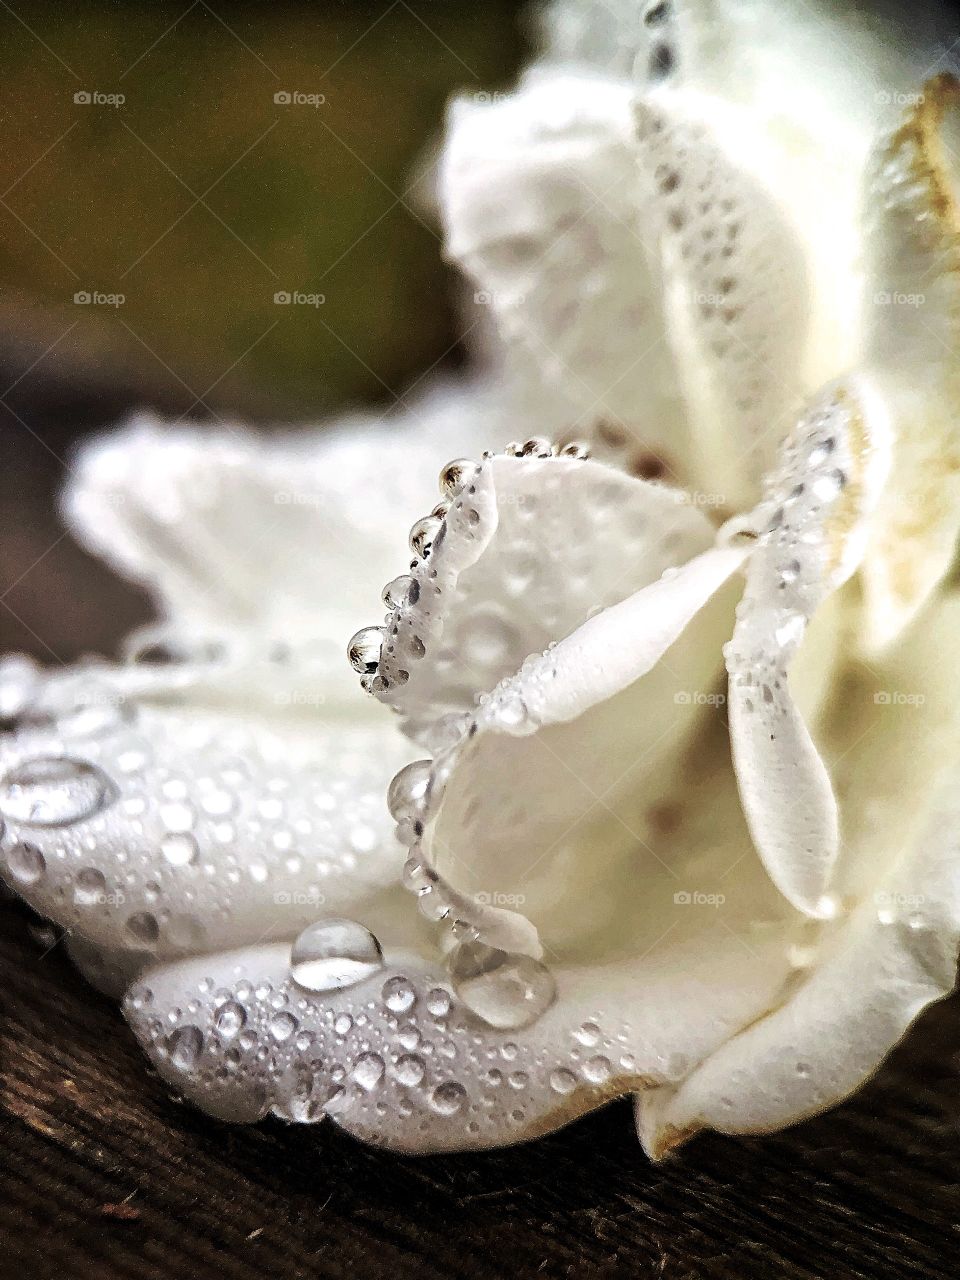 A close up of a white rose after rain